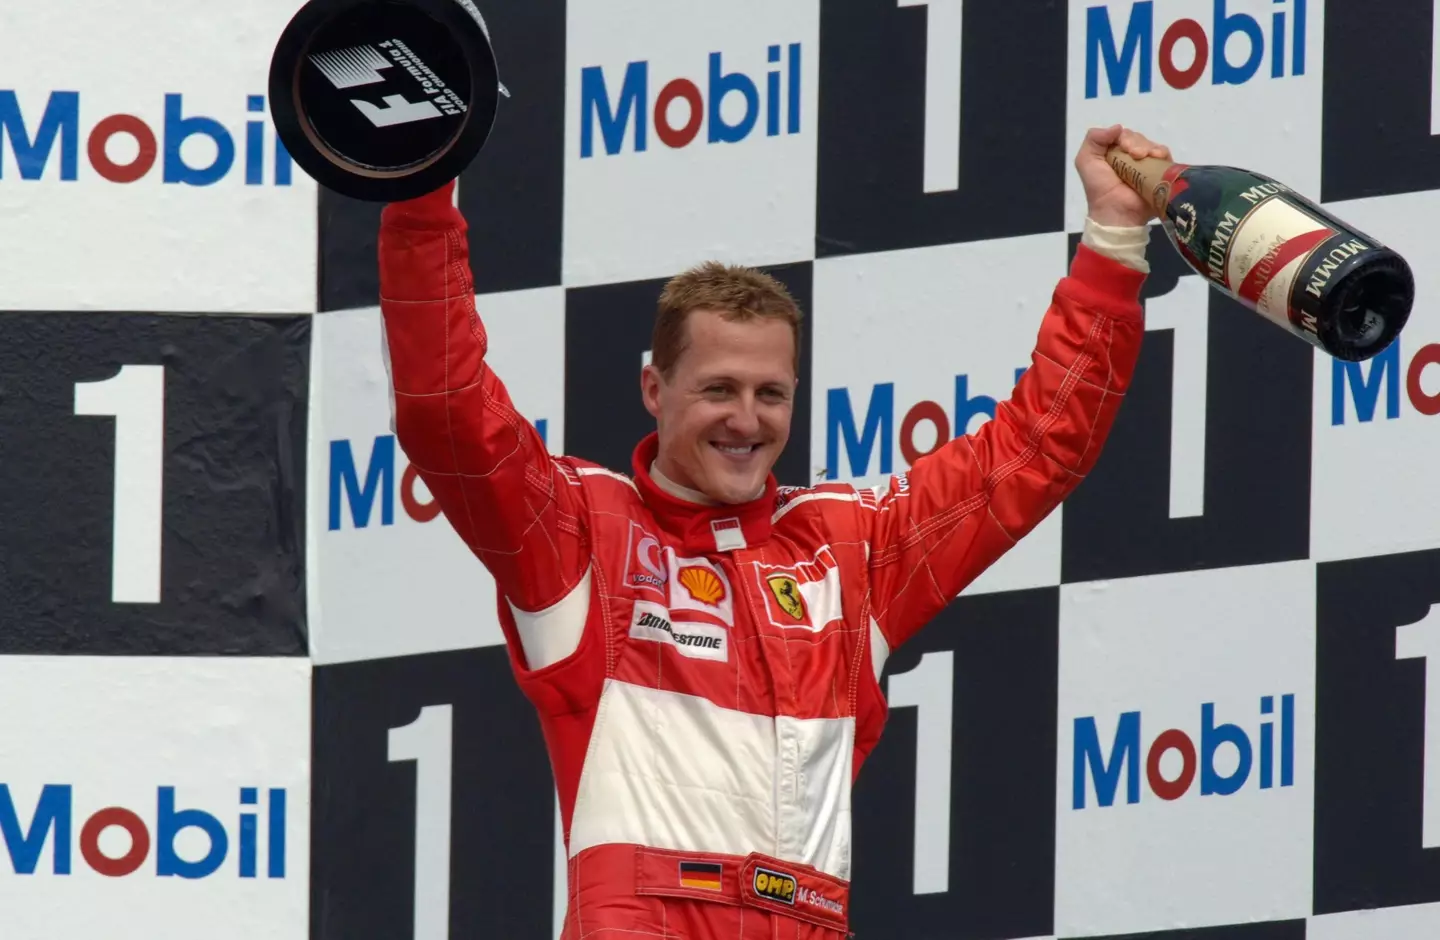 Michael Schumacher has been awarded the prestigious State Prize at Motorworld in Cologne.